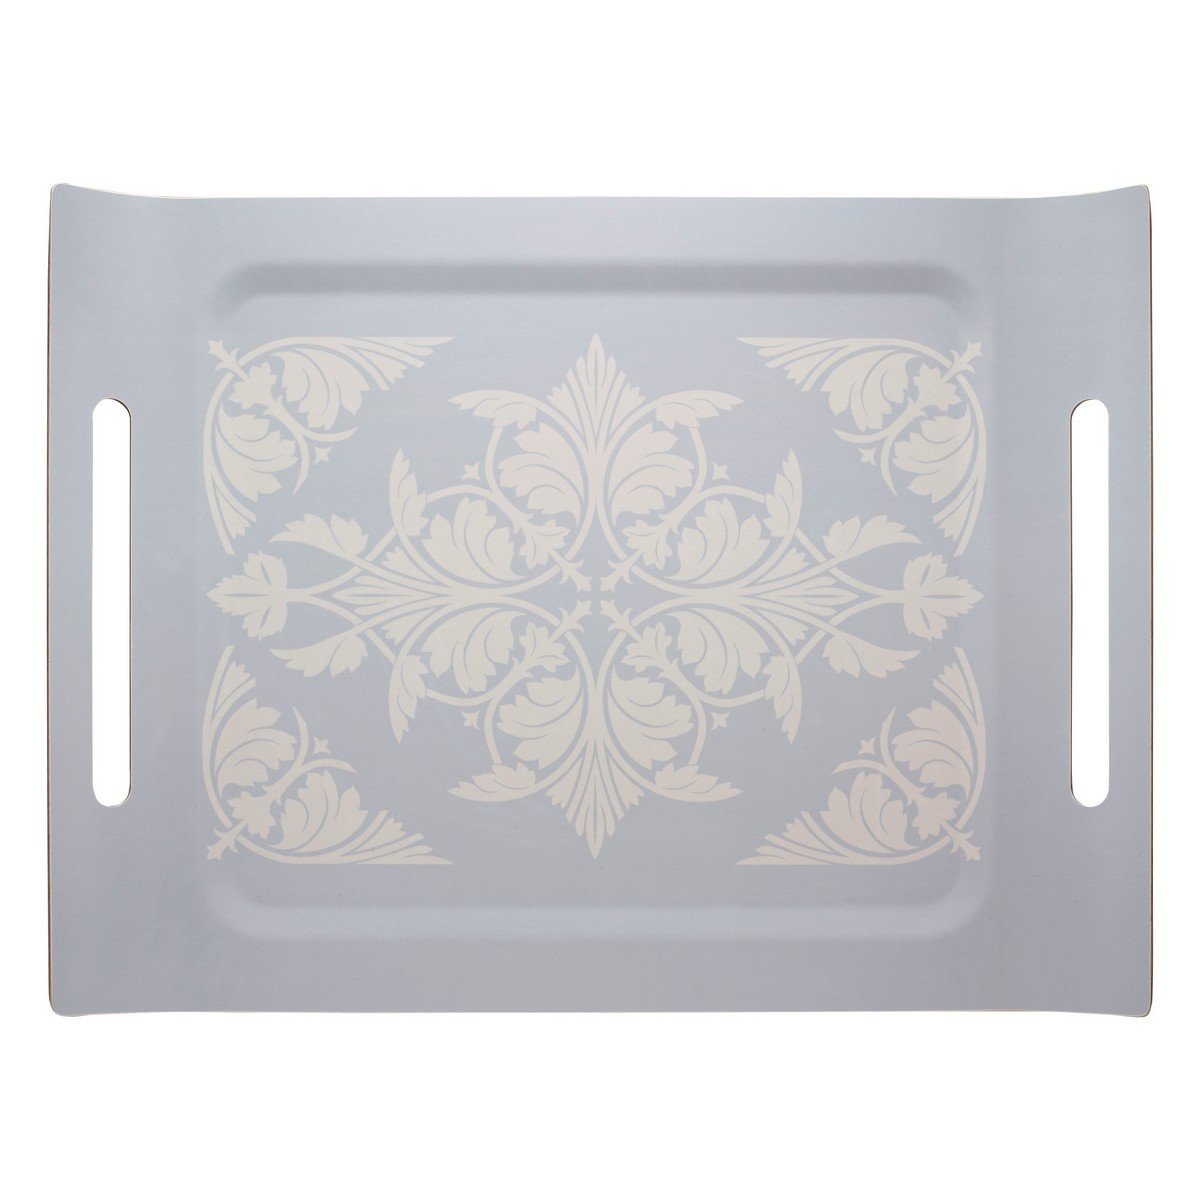 Syracuse Beige Tray by Le Jacquard Français | Fig Linens - Wood, rectangular serving tray